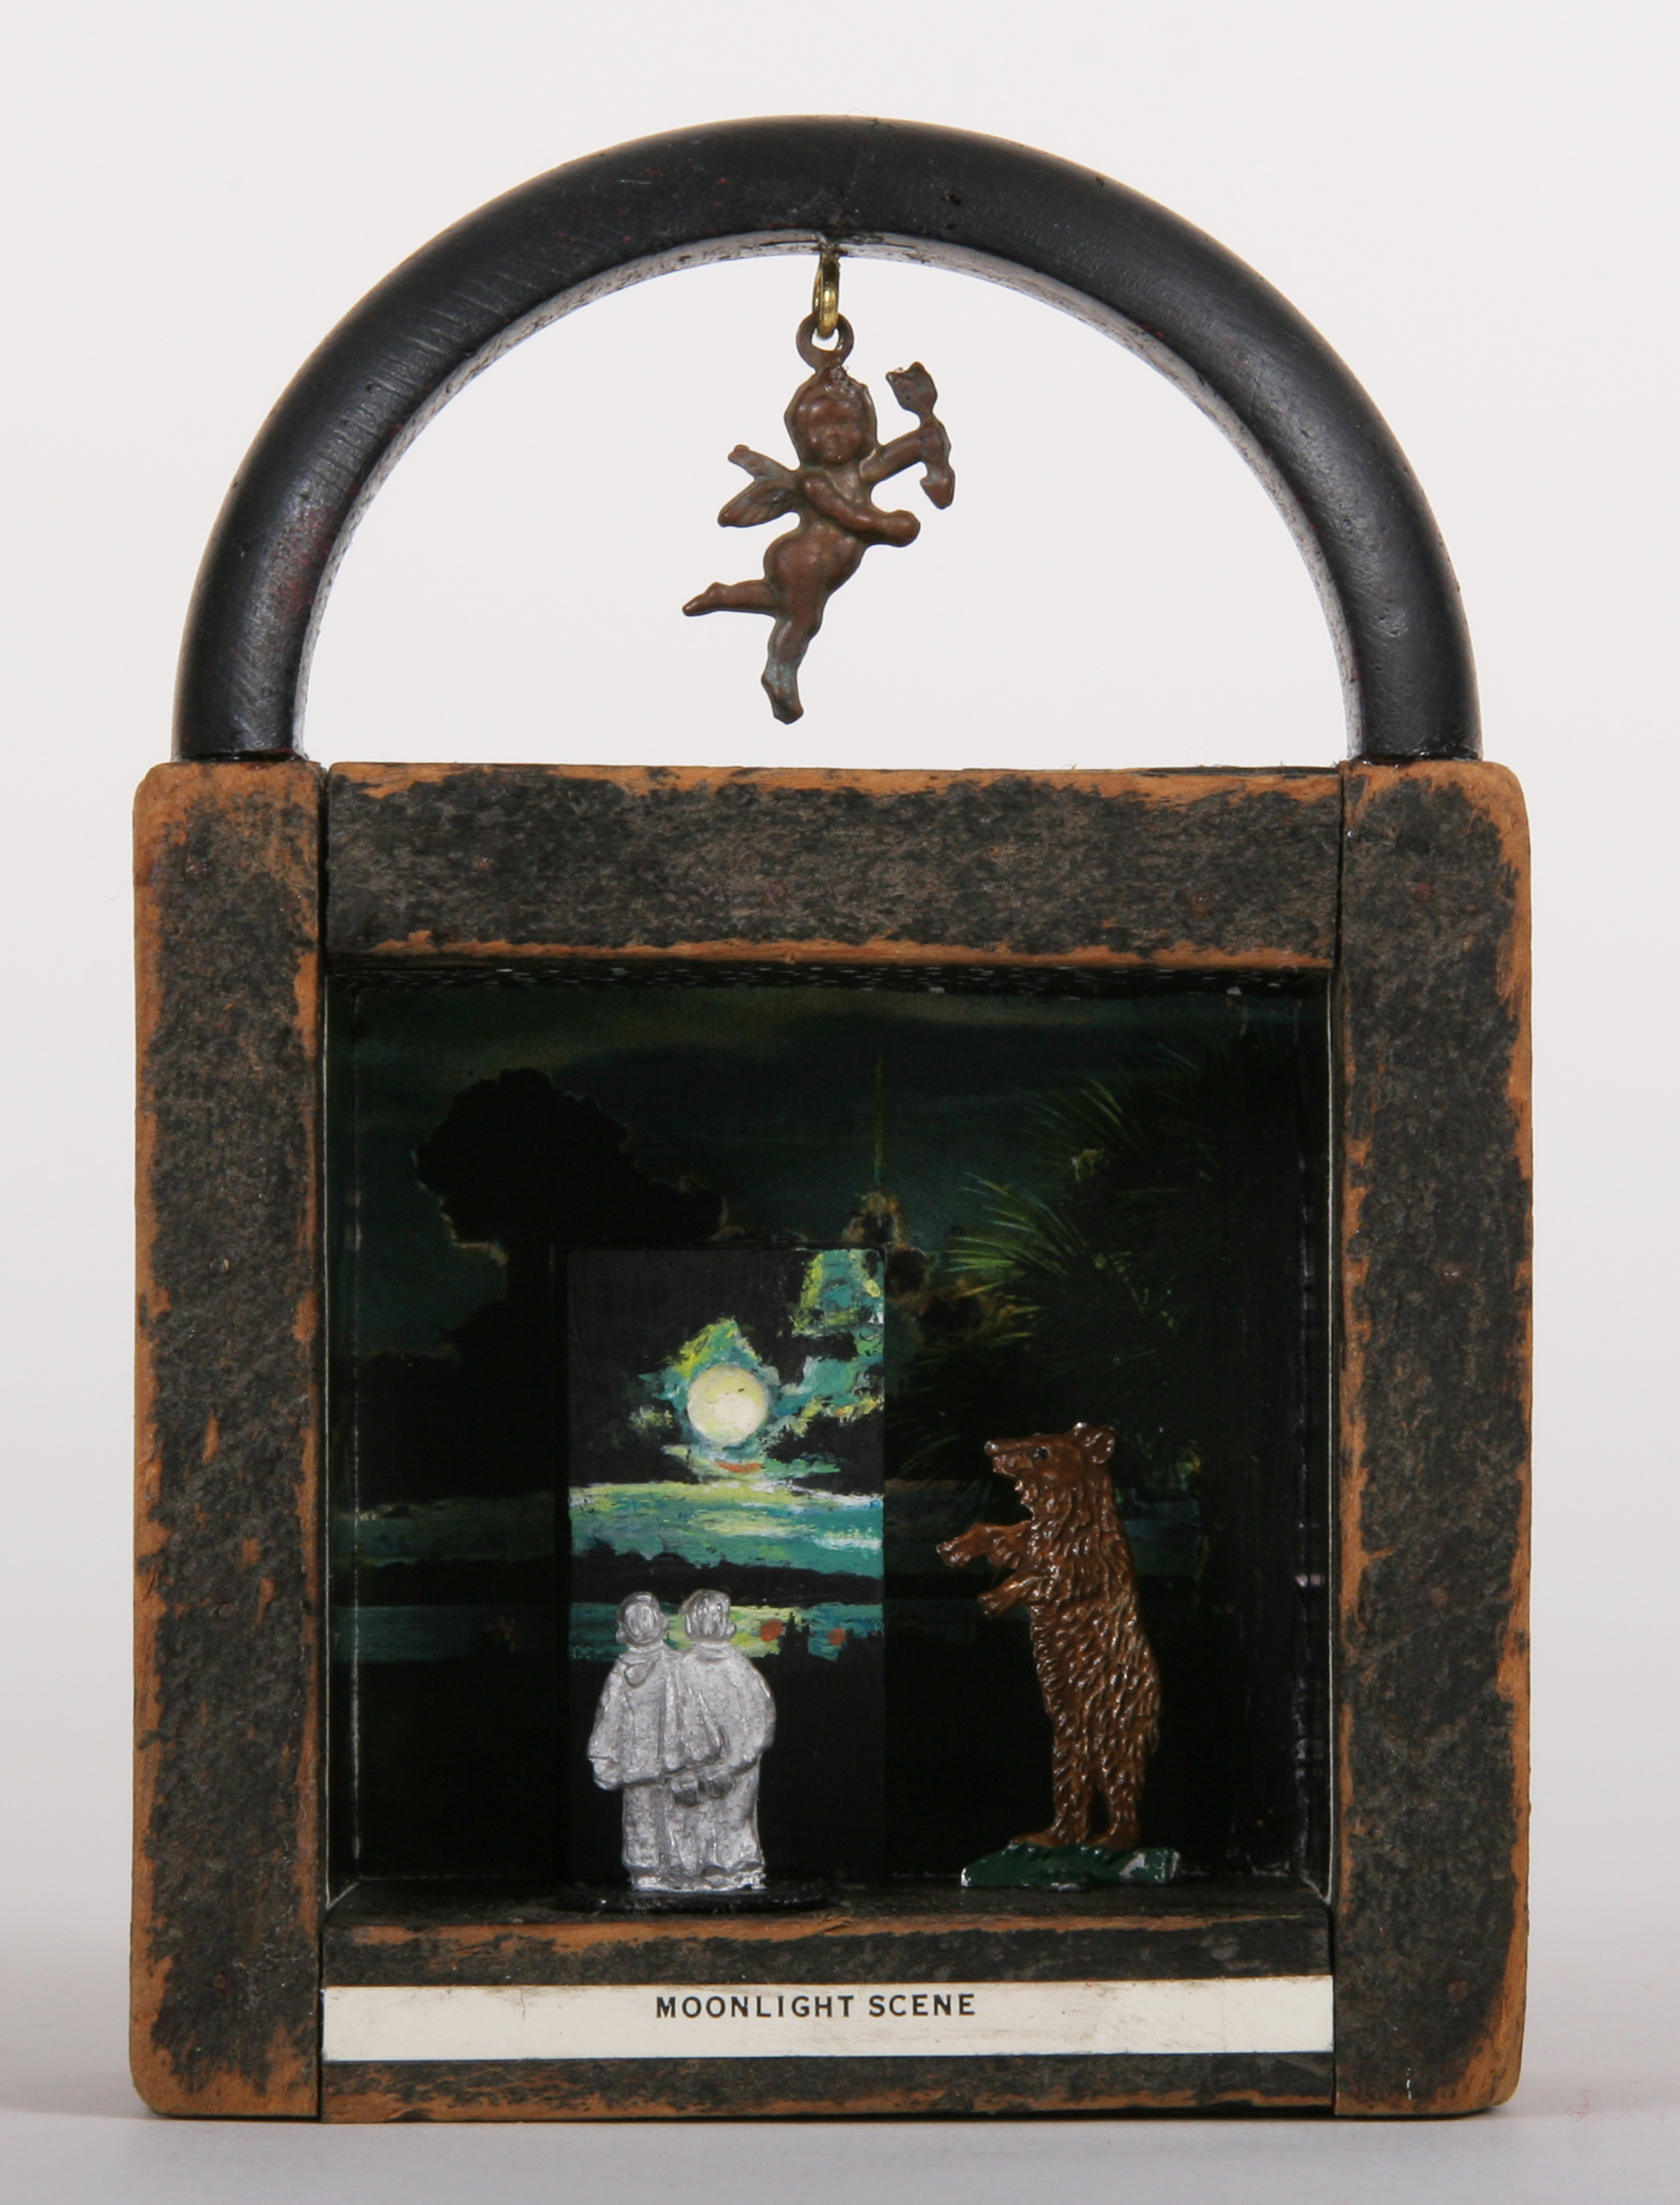     \"Moonlight Scene #1: Couple With Bear\"
    mixed-media assemblage
    5.75 x 3.625 x 1.5
    2009

    SOLD

    Wood foundry pattern, acrylic painting of moon on wood domino with vintage postcard, metal toy figures, angel charm, bracelet, enamel